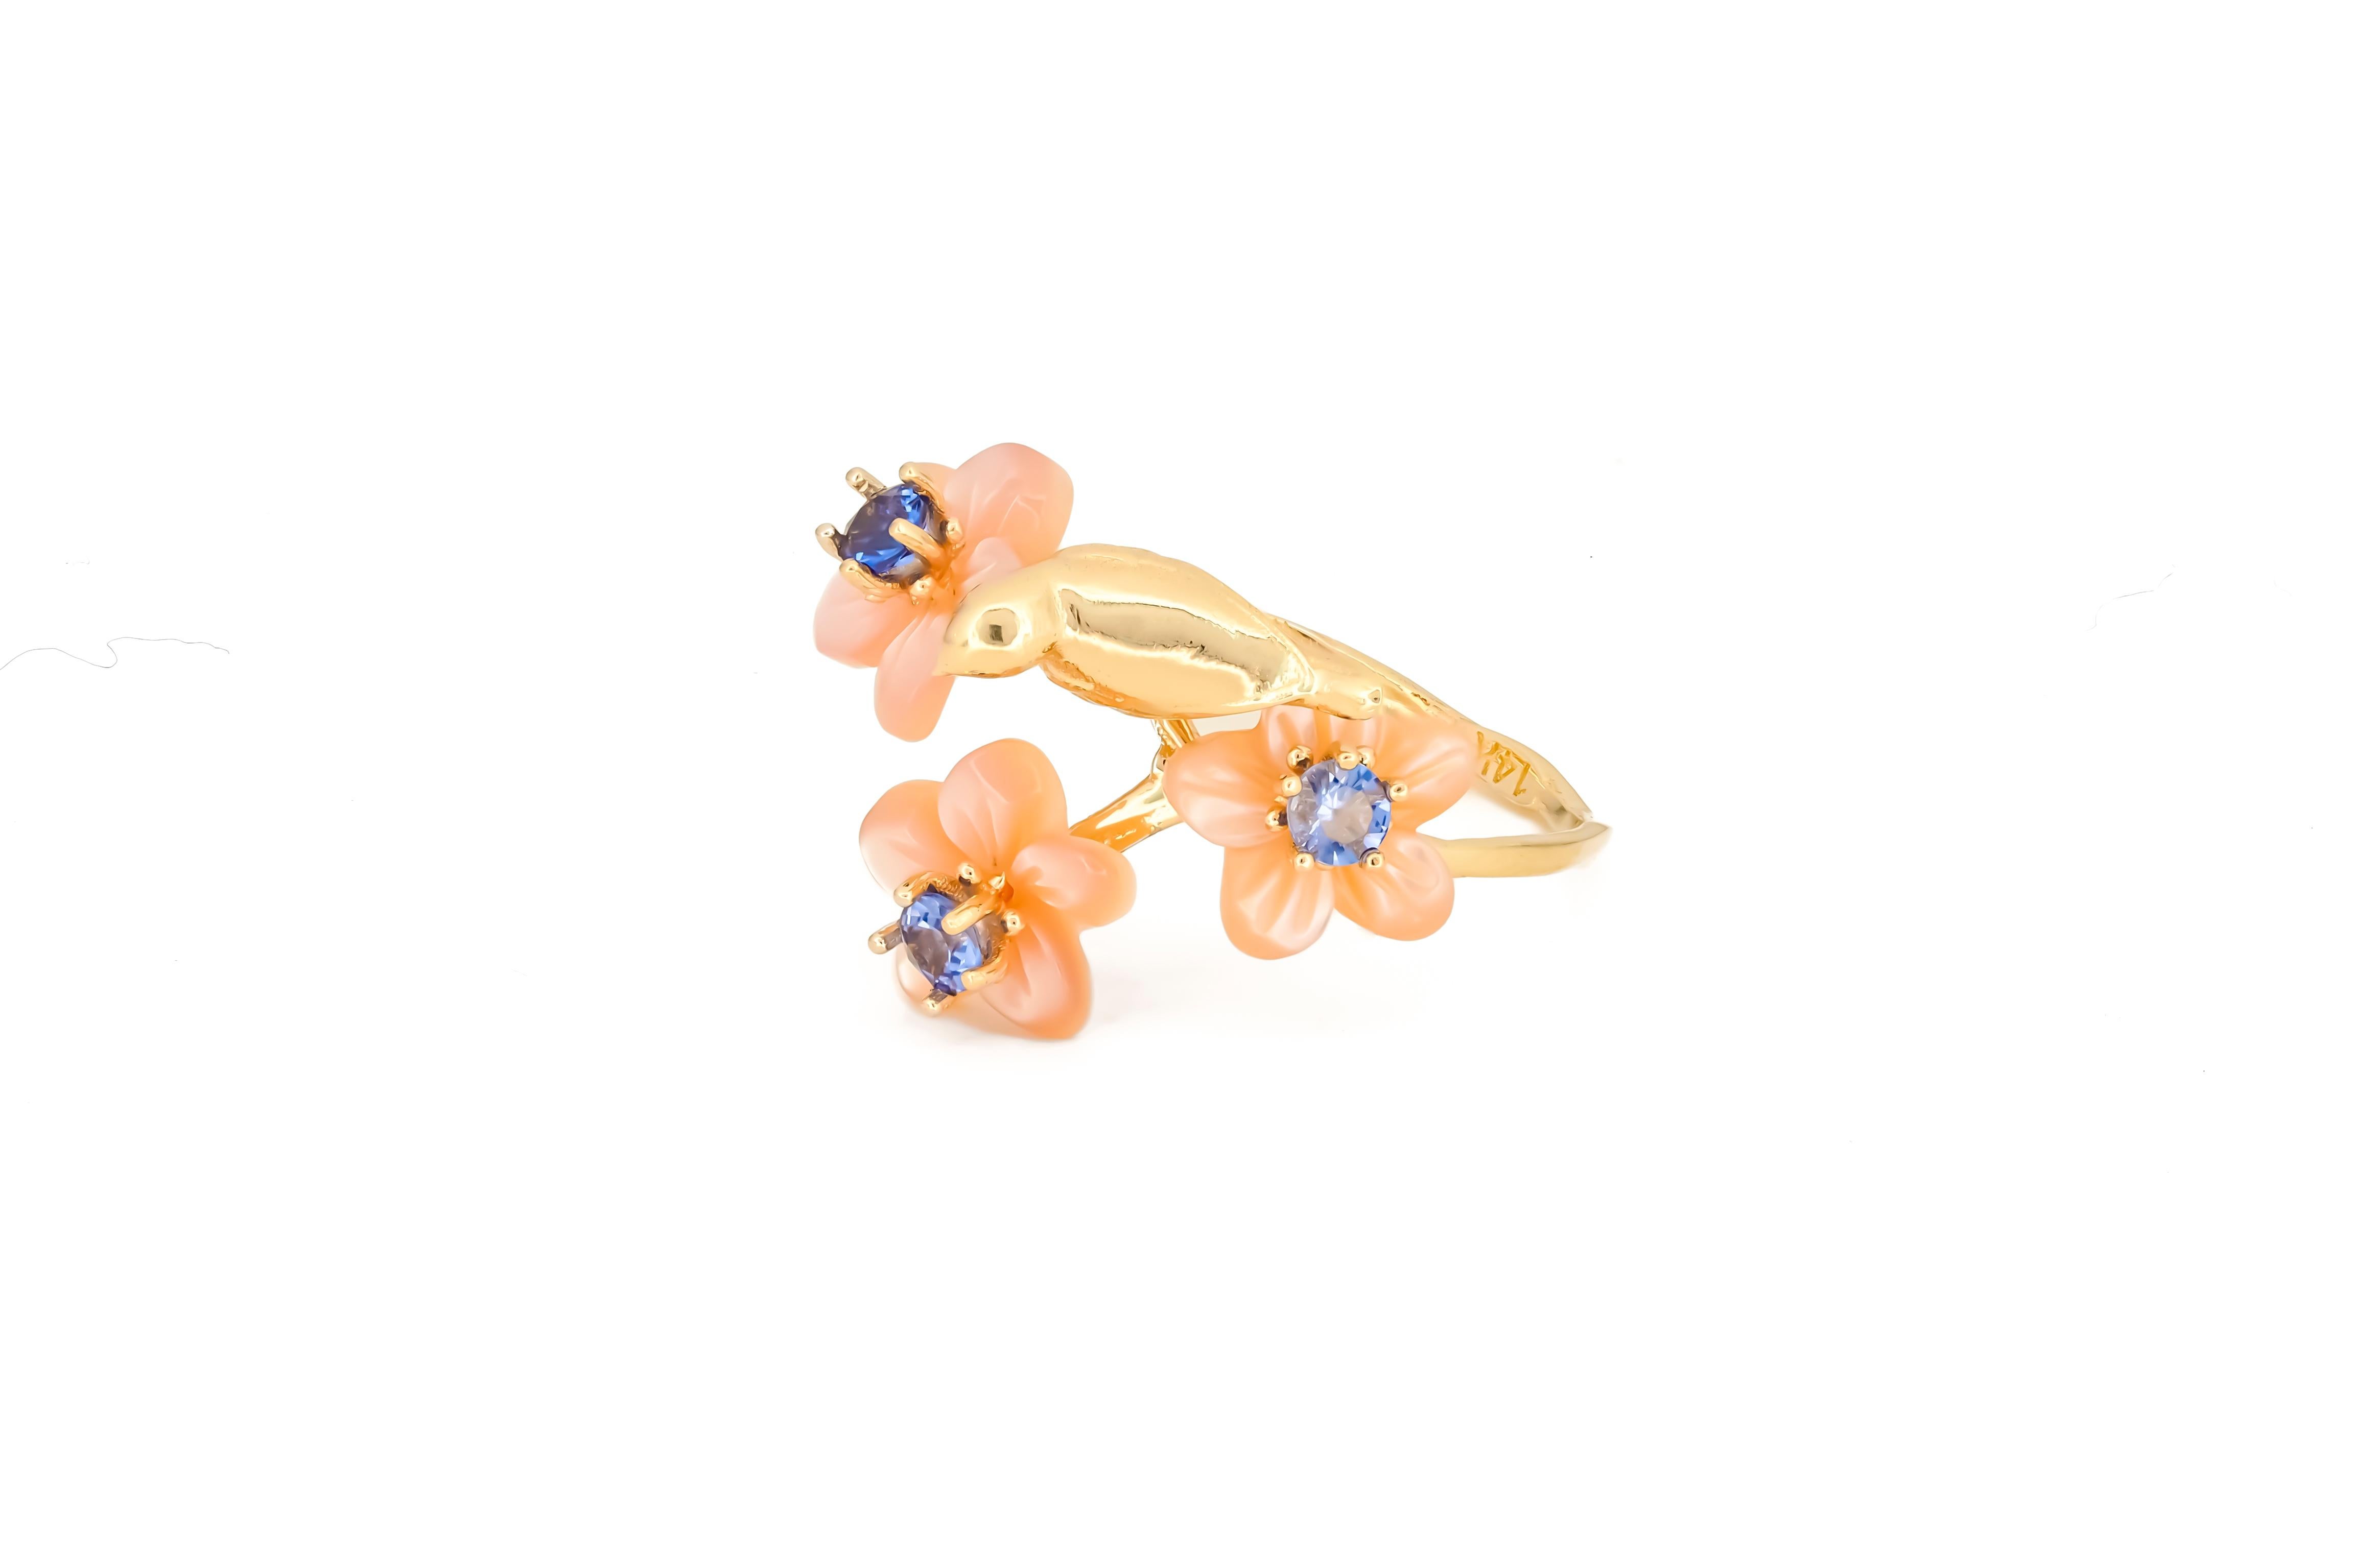 For Sale:  14k Gold Bird on Branch Ring. Sapphires and Carved Mother of Pearl ring! 5